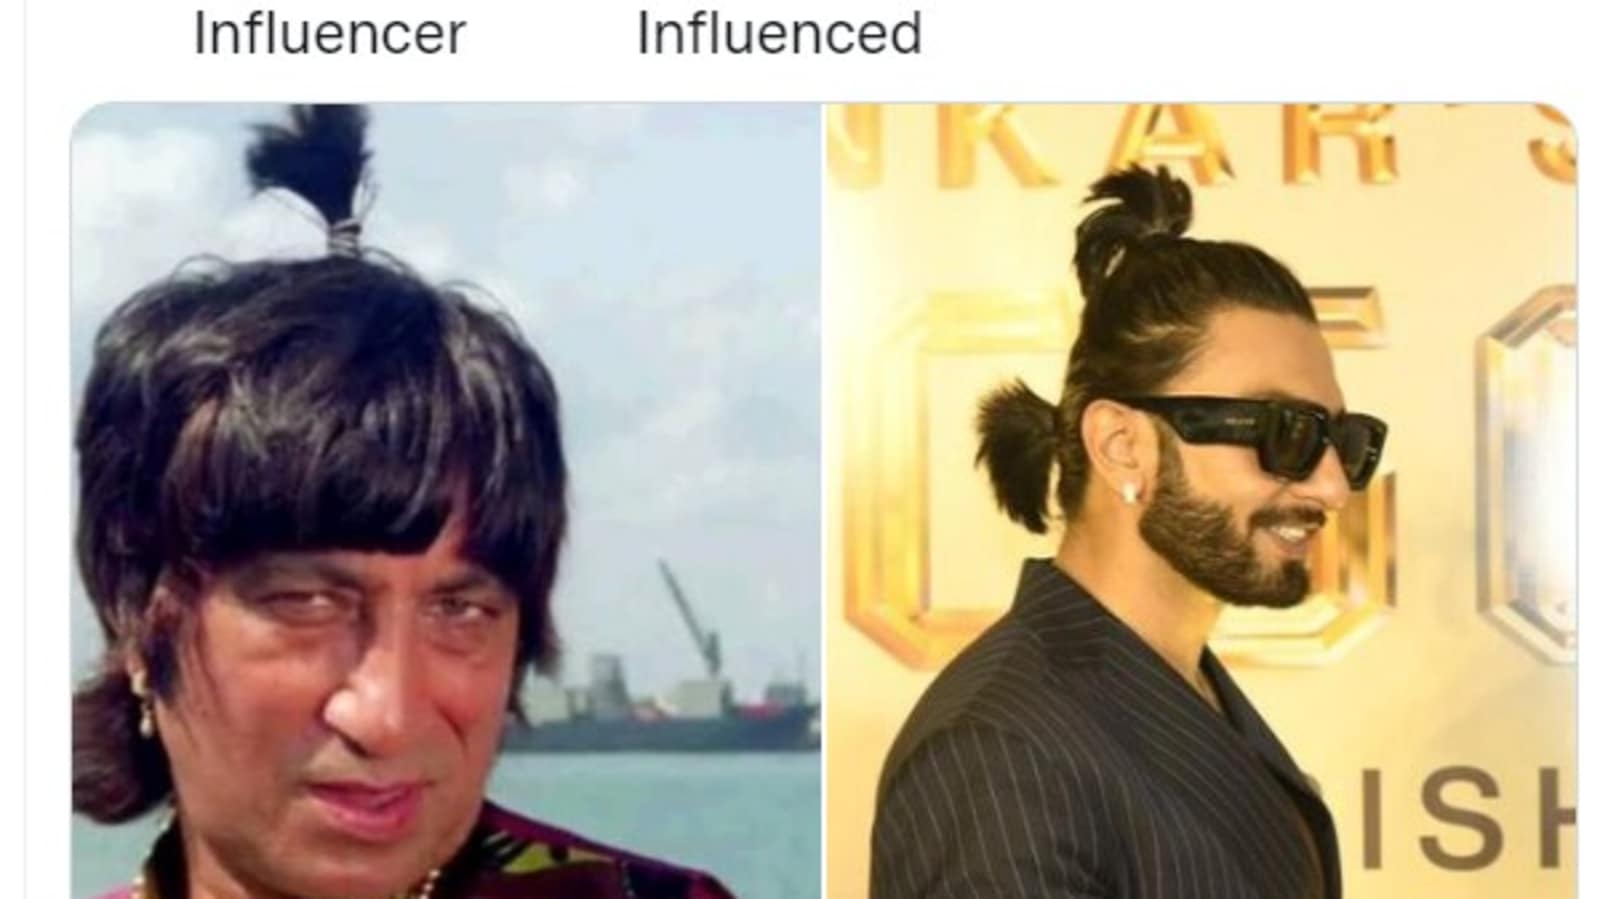 7 Ranveer Singh Hairstyles That Are Perfect For Your Next Tinder DP